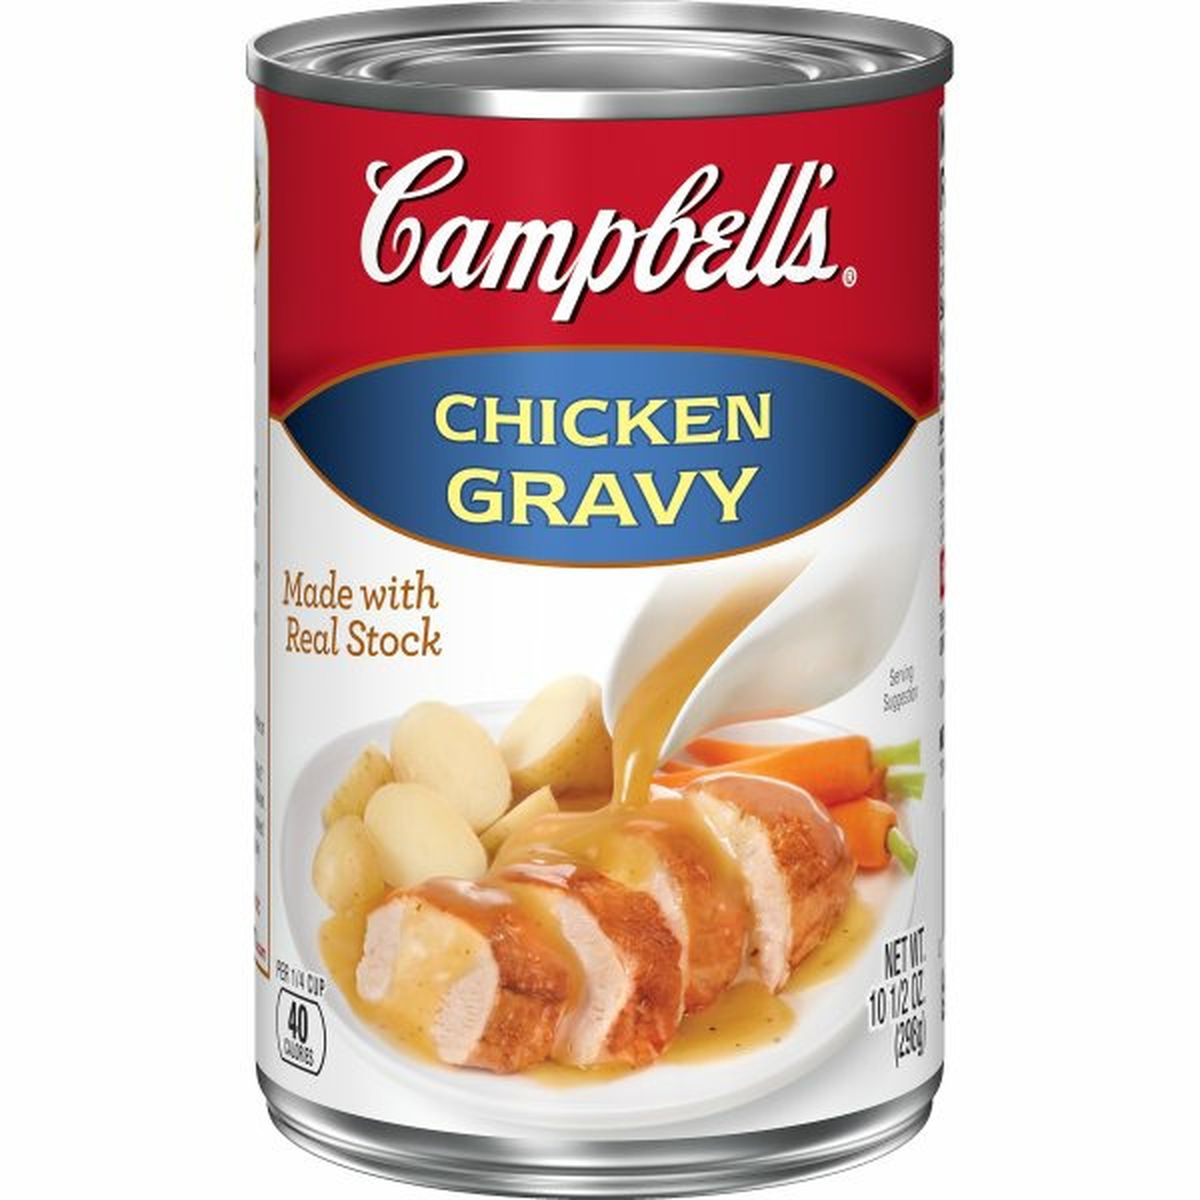 Calories in Campbell'ss Chicken Gravy